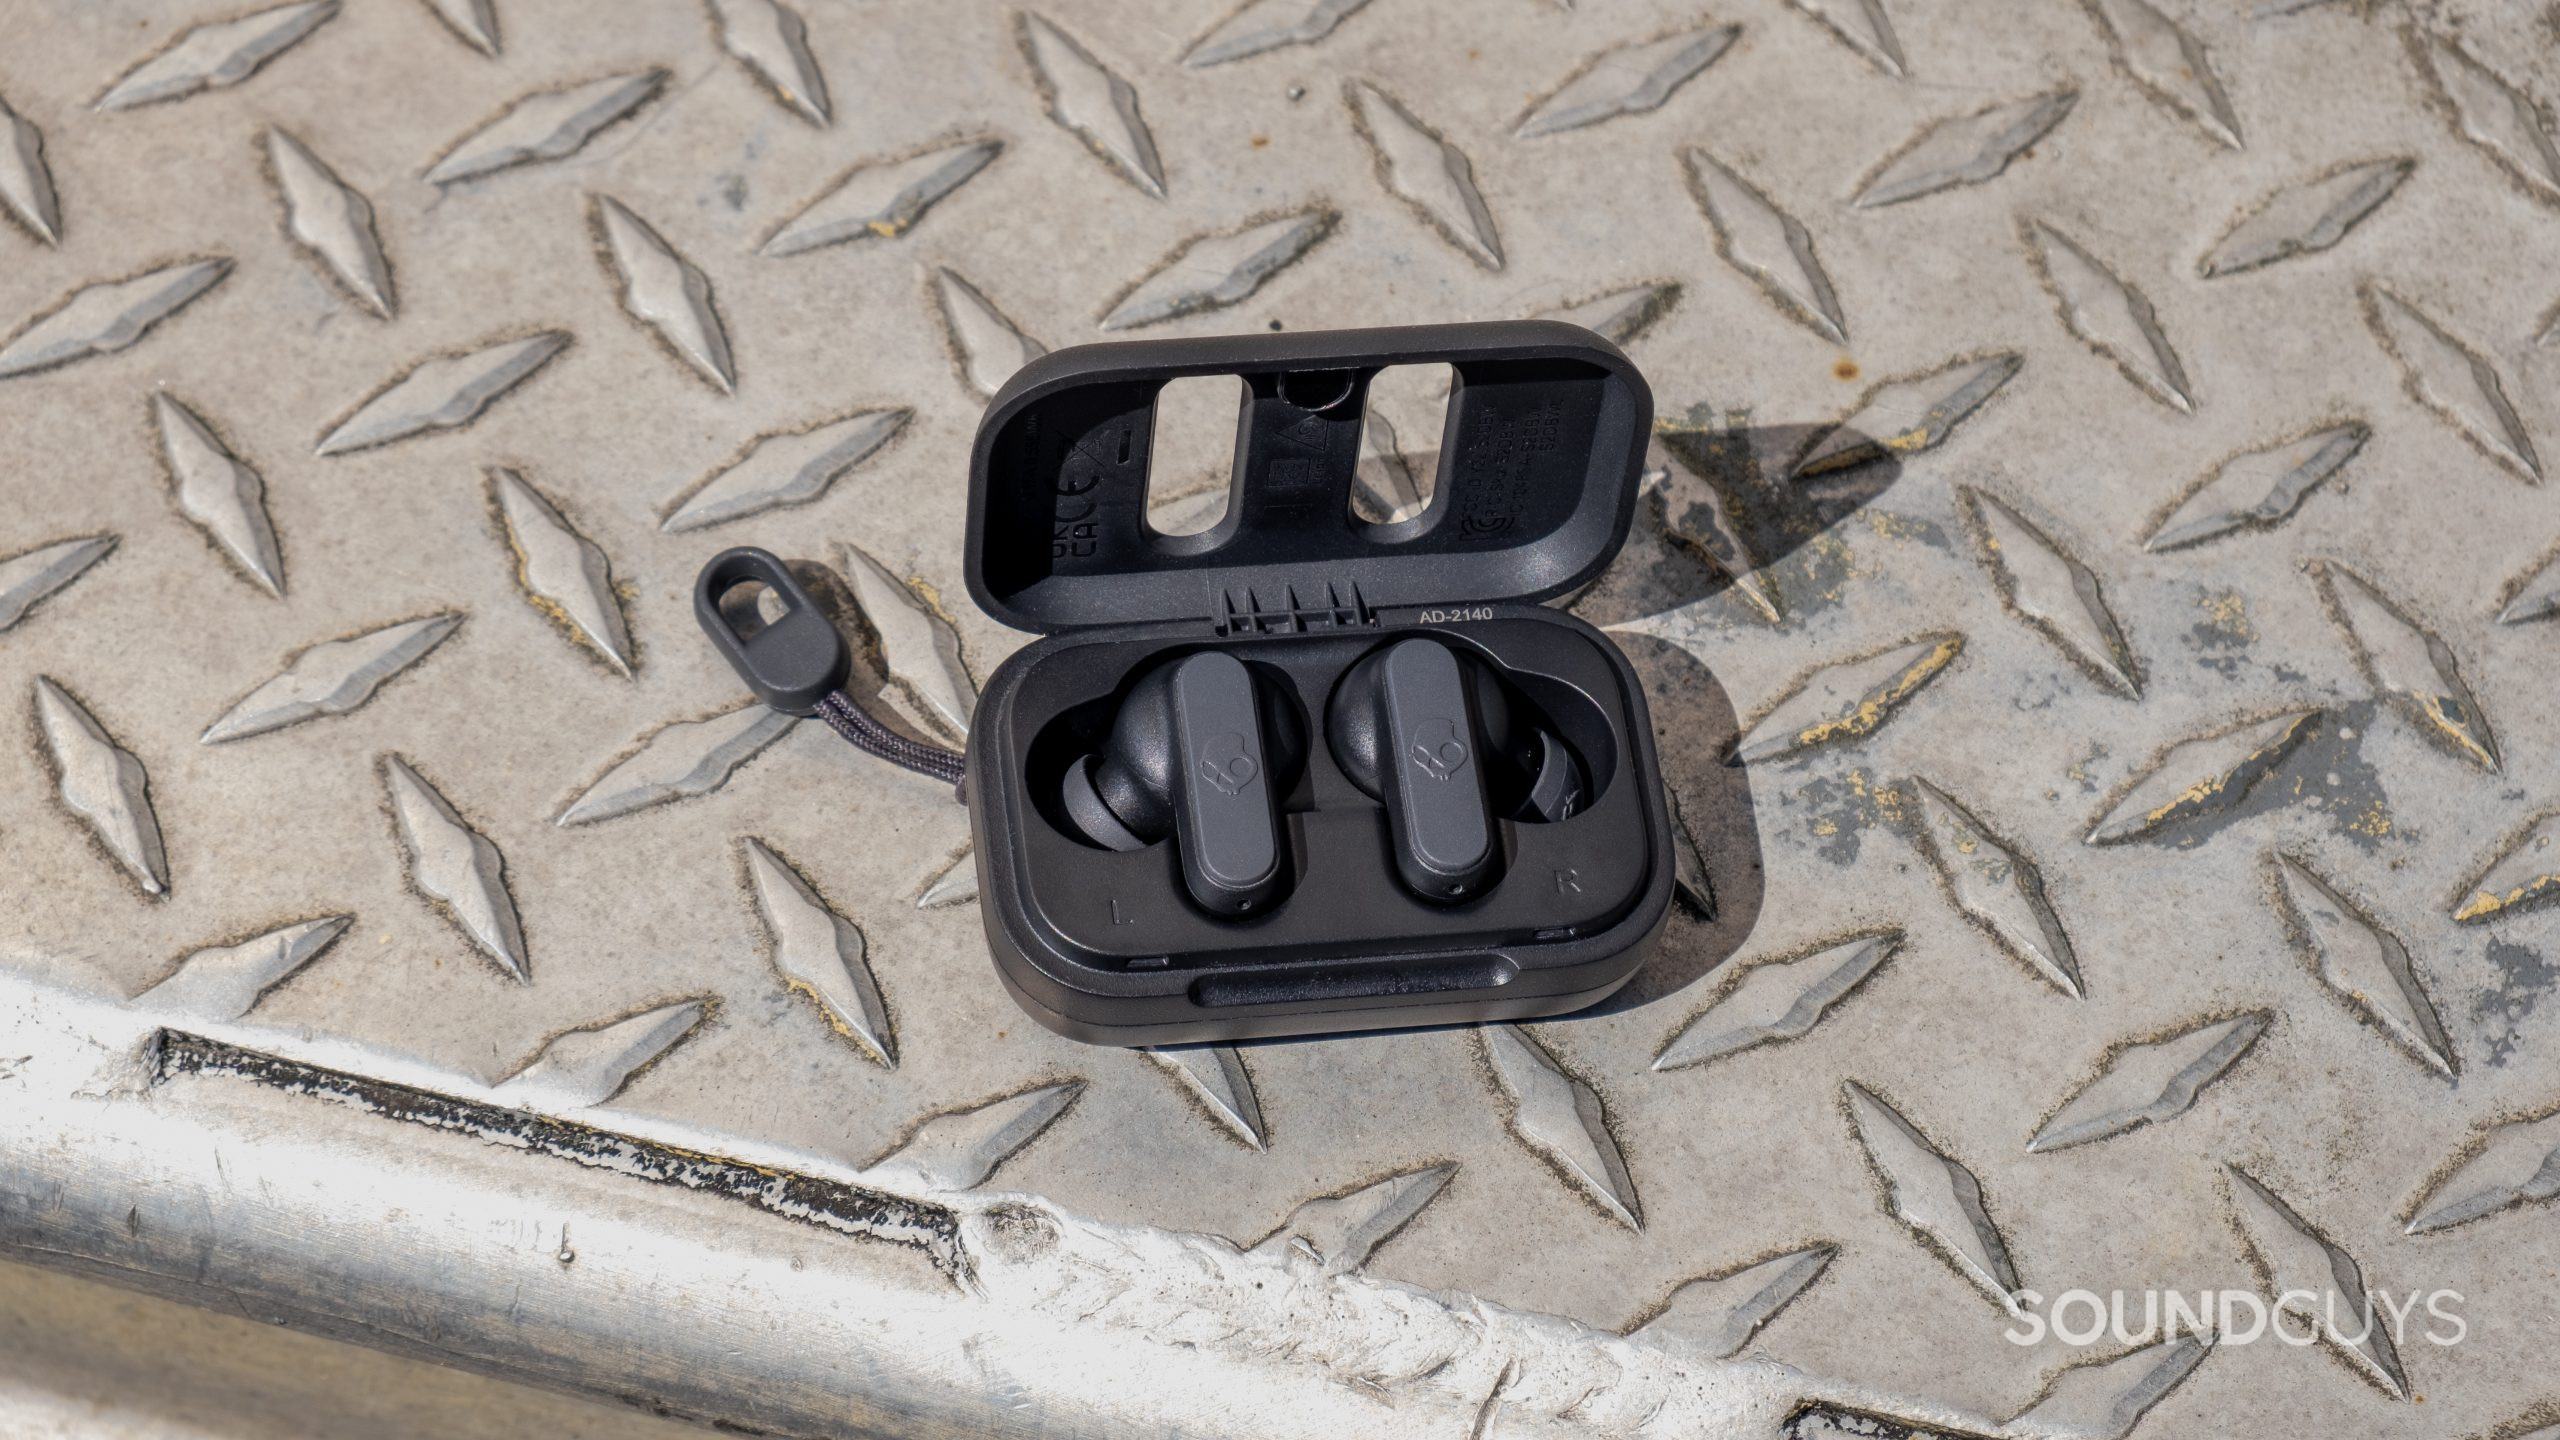 The Skullcandy Dime 2 rests with the open case on a weather worn metal surface.